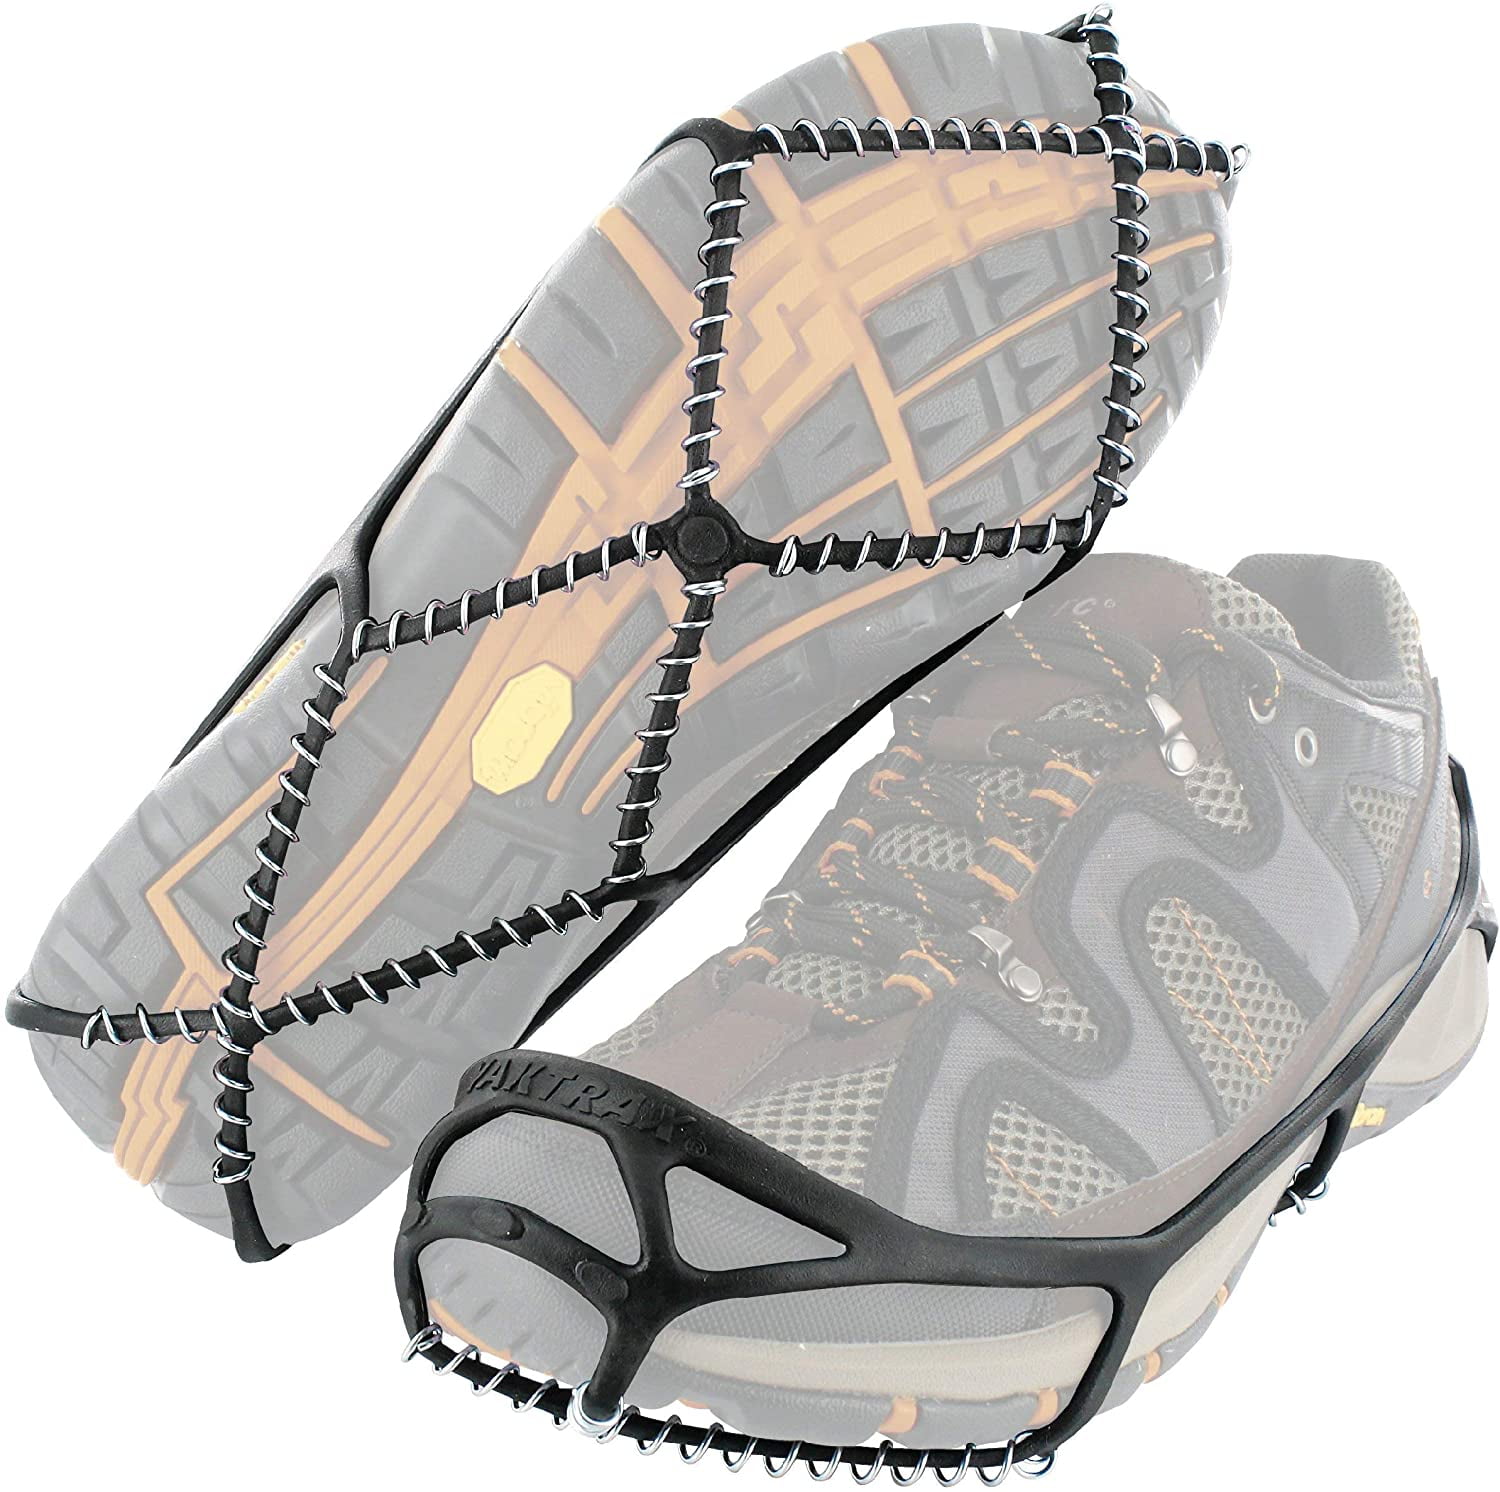 Yaktrax 08133 Shoe Traction SkiTrax L Black 096506081339 for sale online 